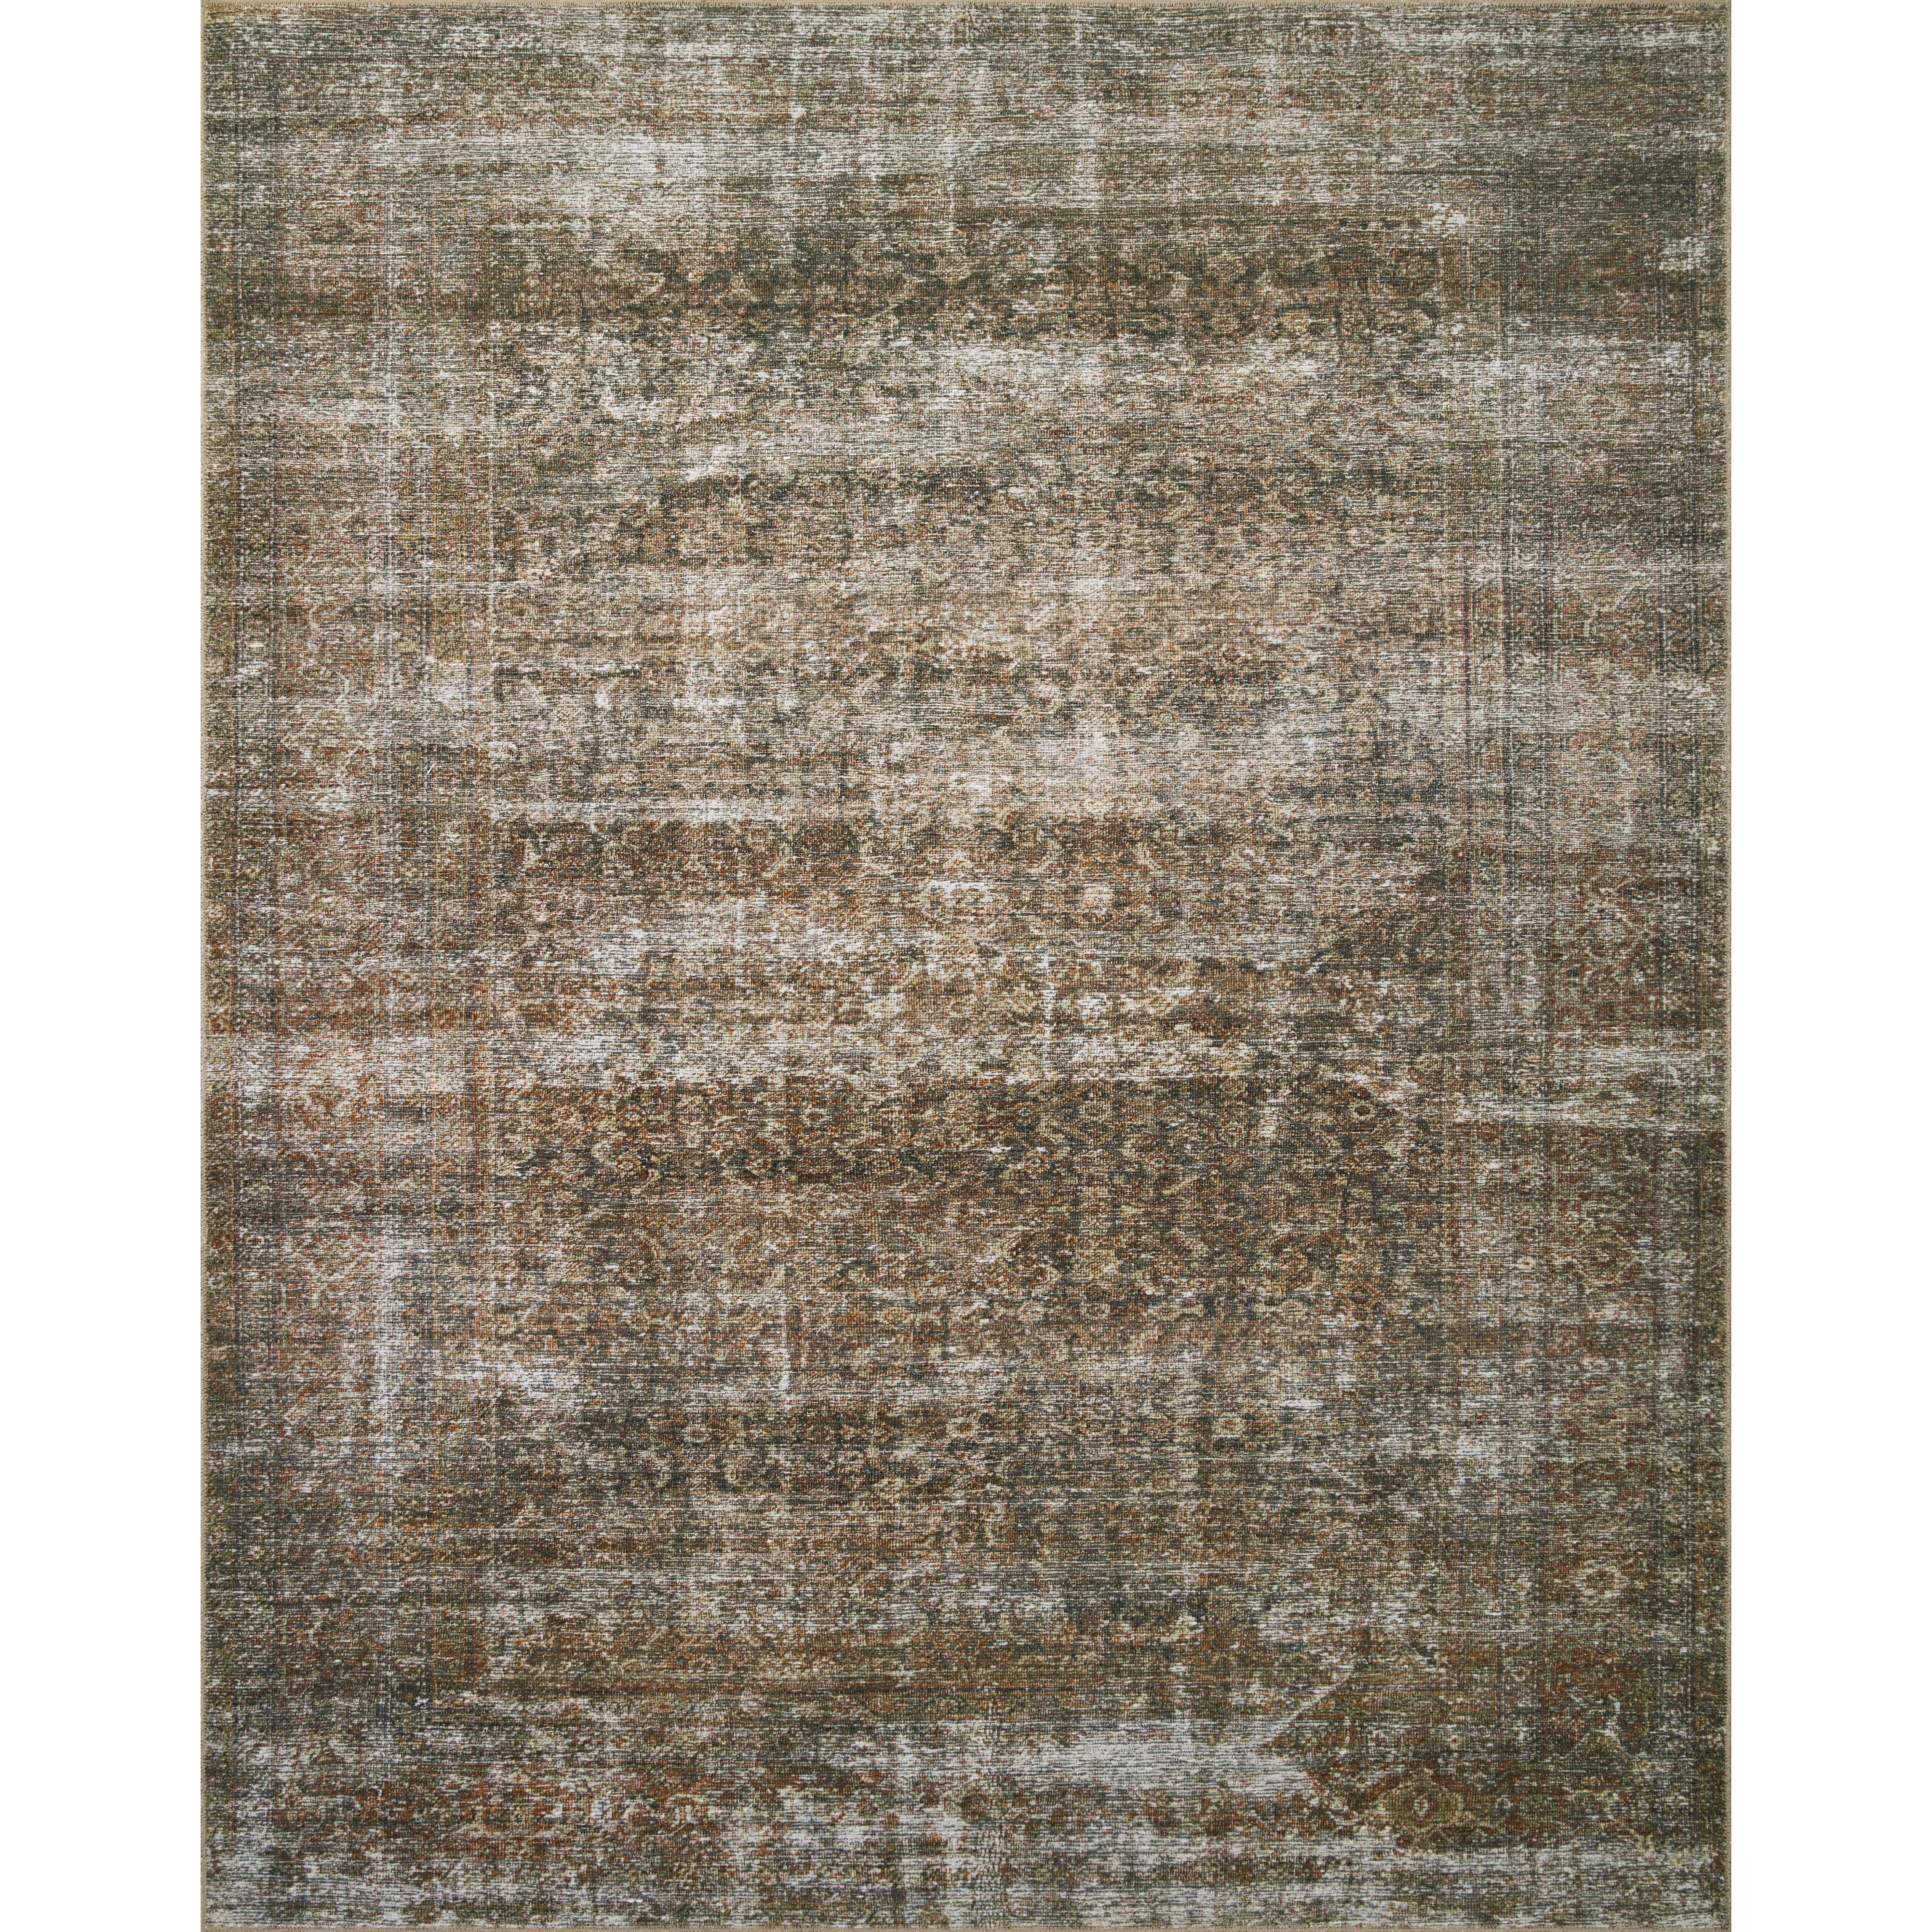 Amber Lewis x Loloi Billie BIL-05 Vintage / Overdyed Area Rugs